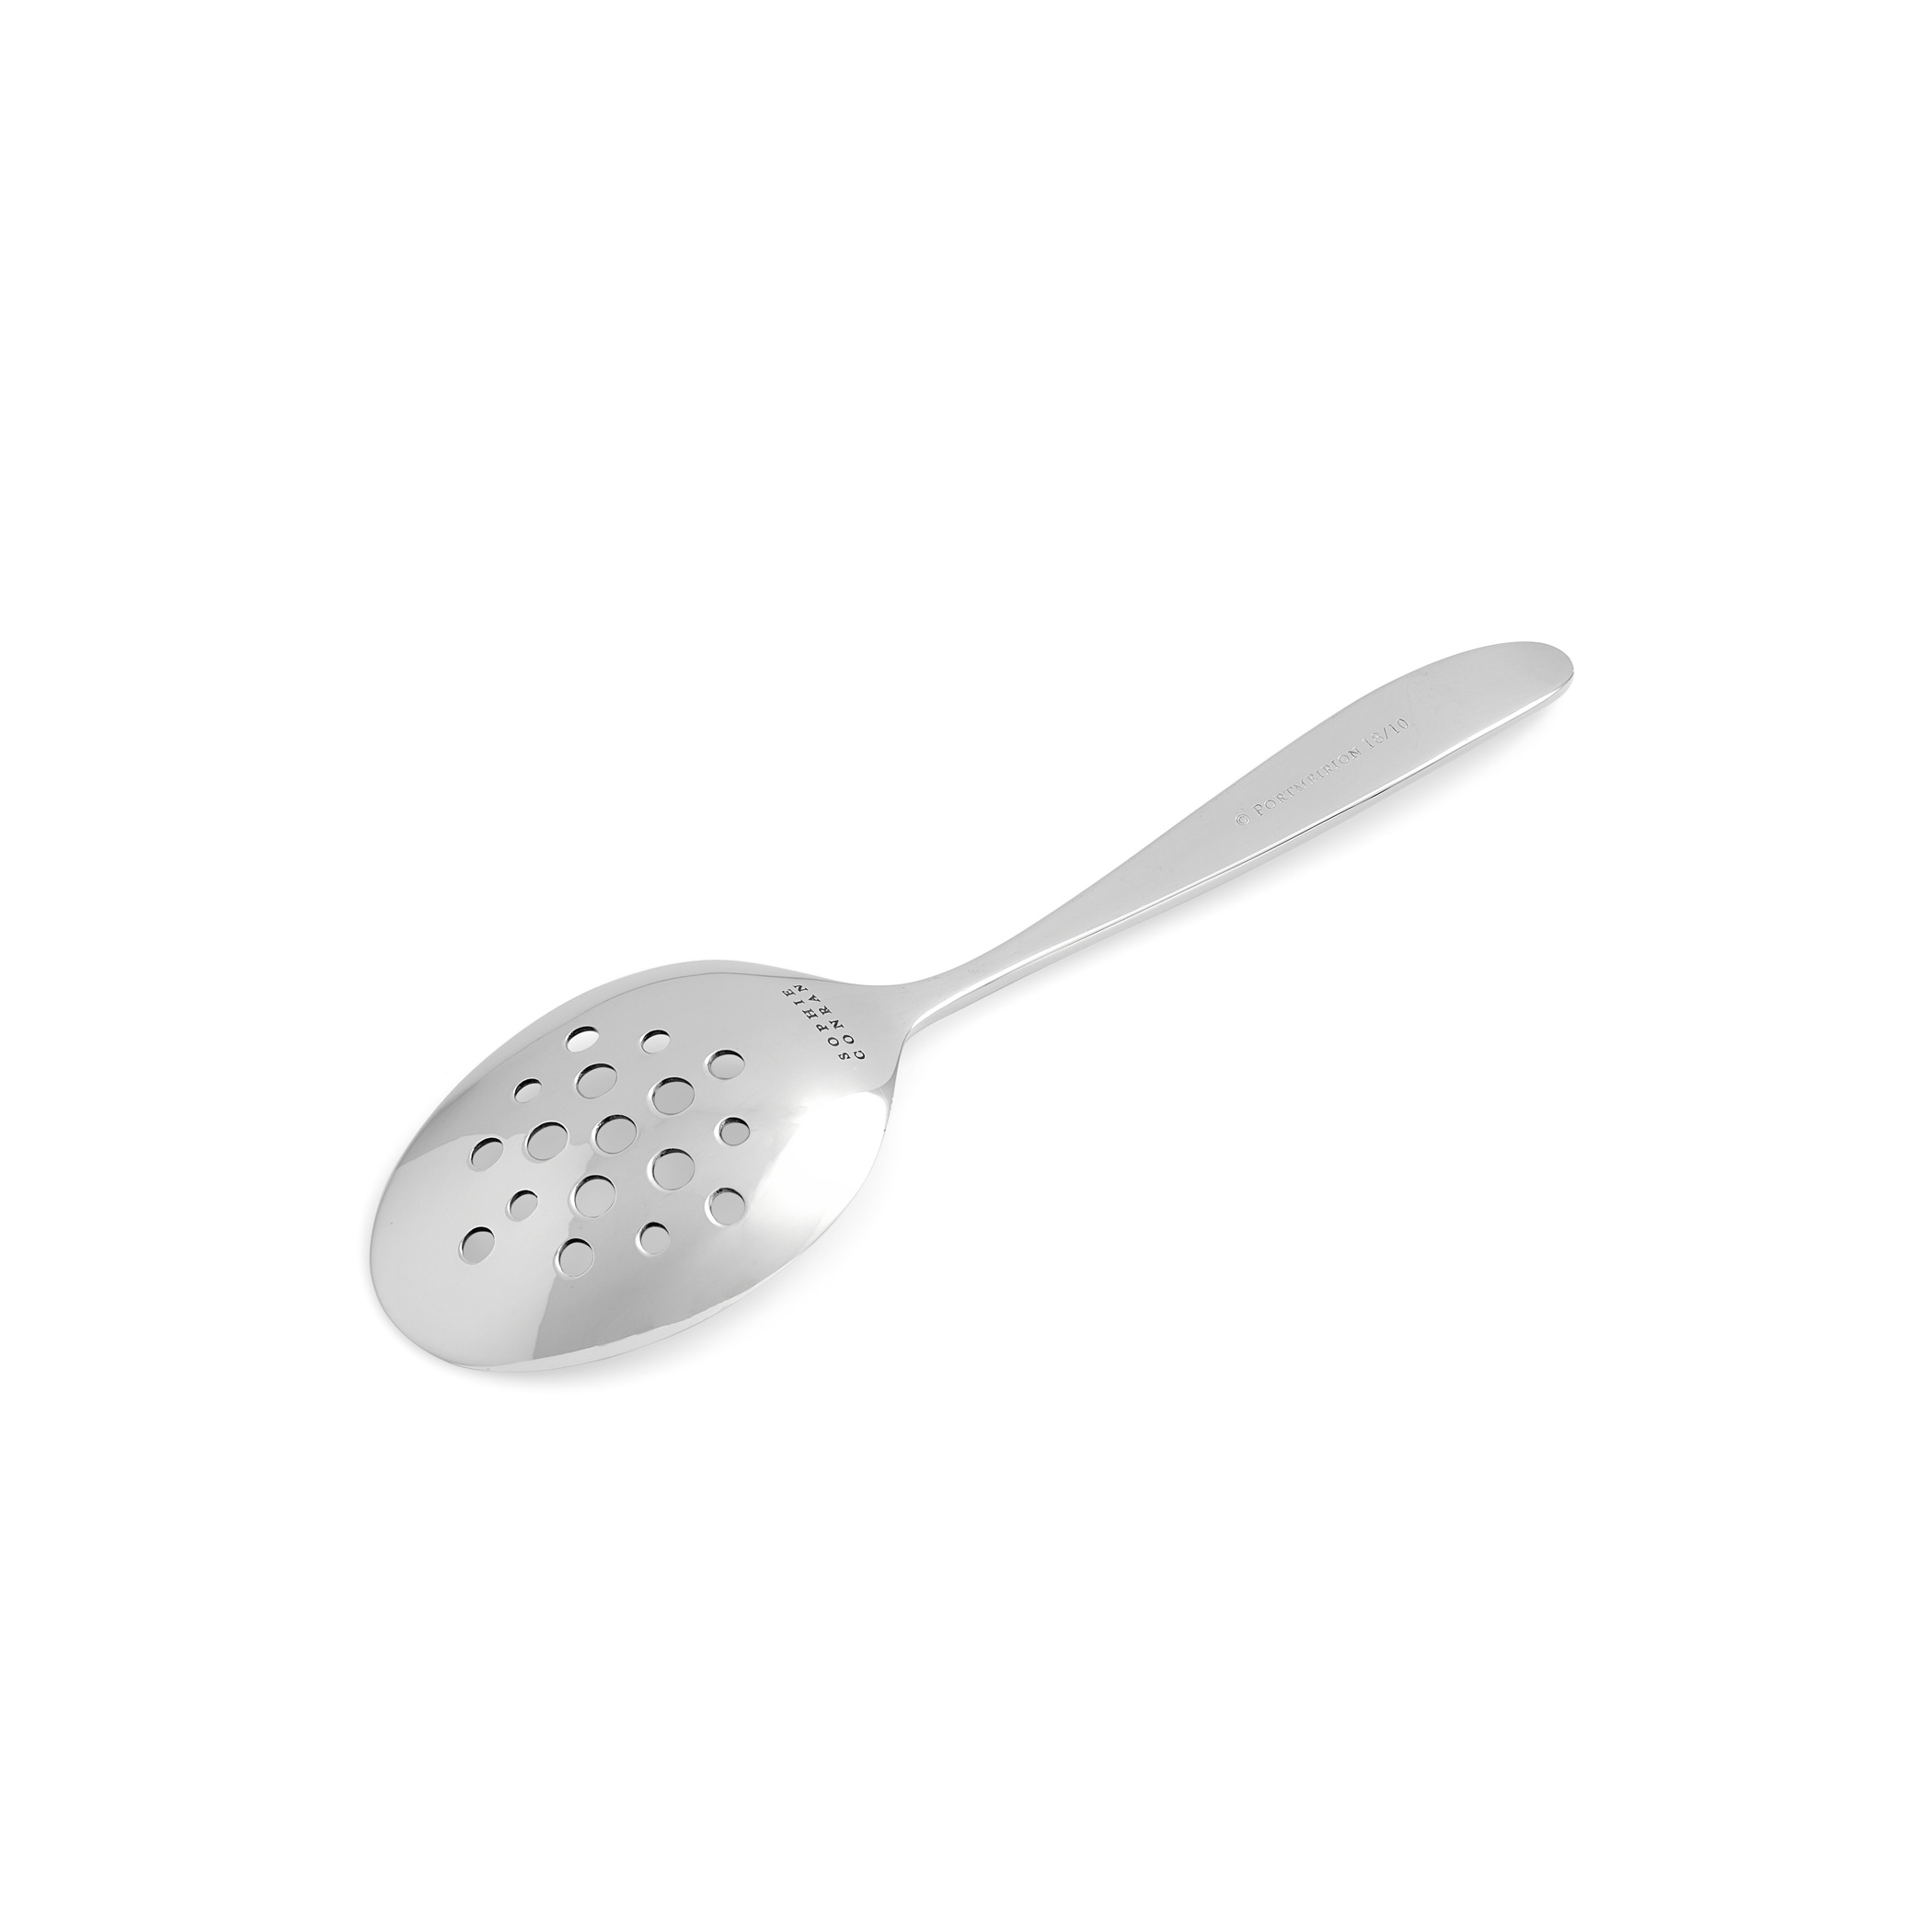 Sophie Conran Floret Slotted Spoon image number null